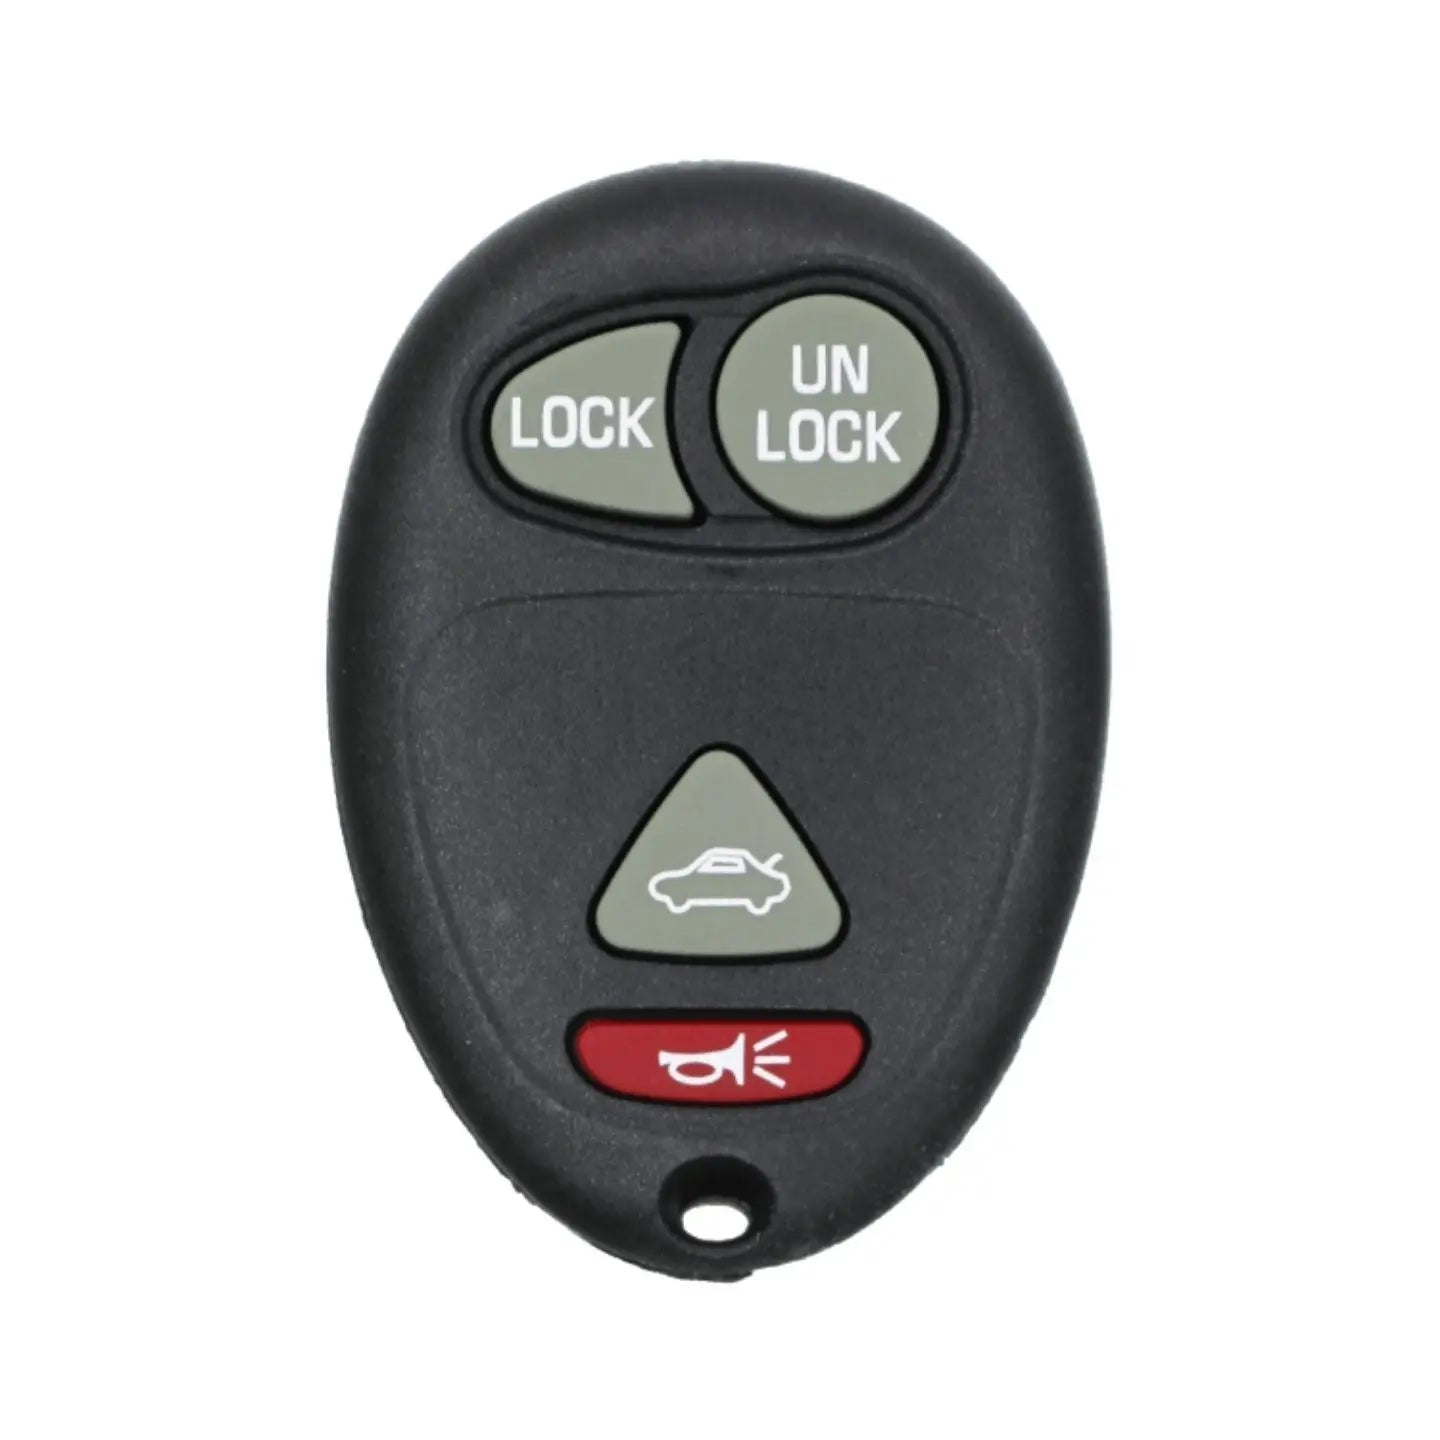 2001-2007 (Aftermarket) Keyless Entry Remote for Pontiac - Buick  PN 10335588  L2C0007T